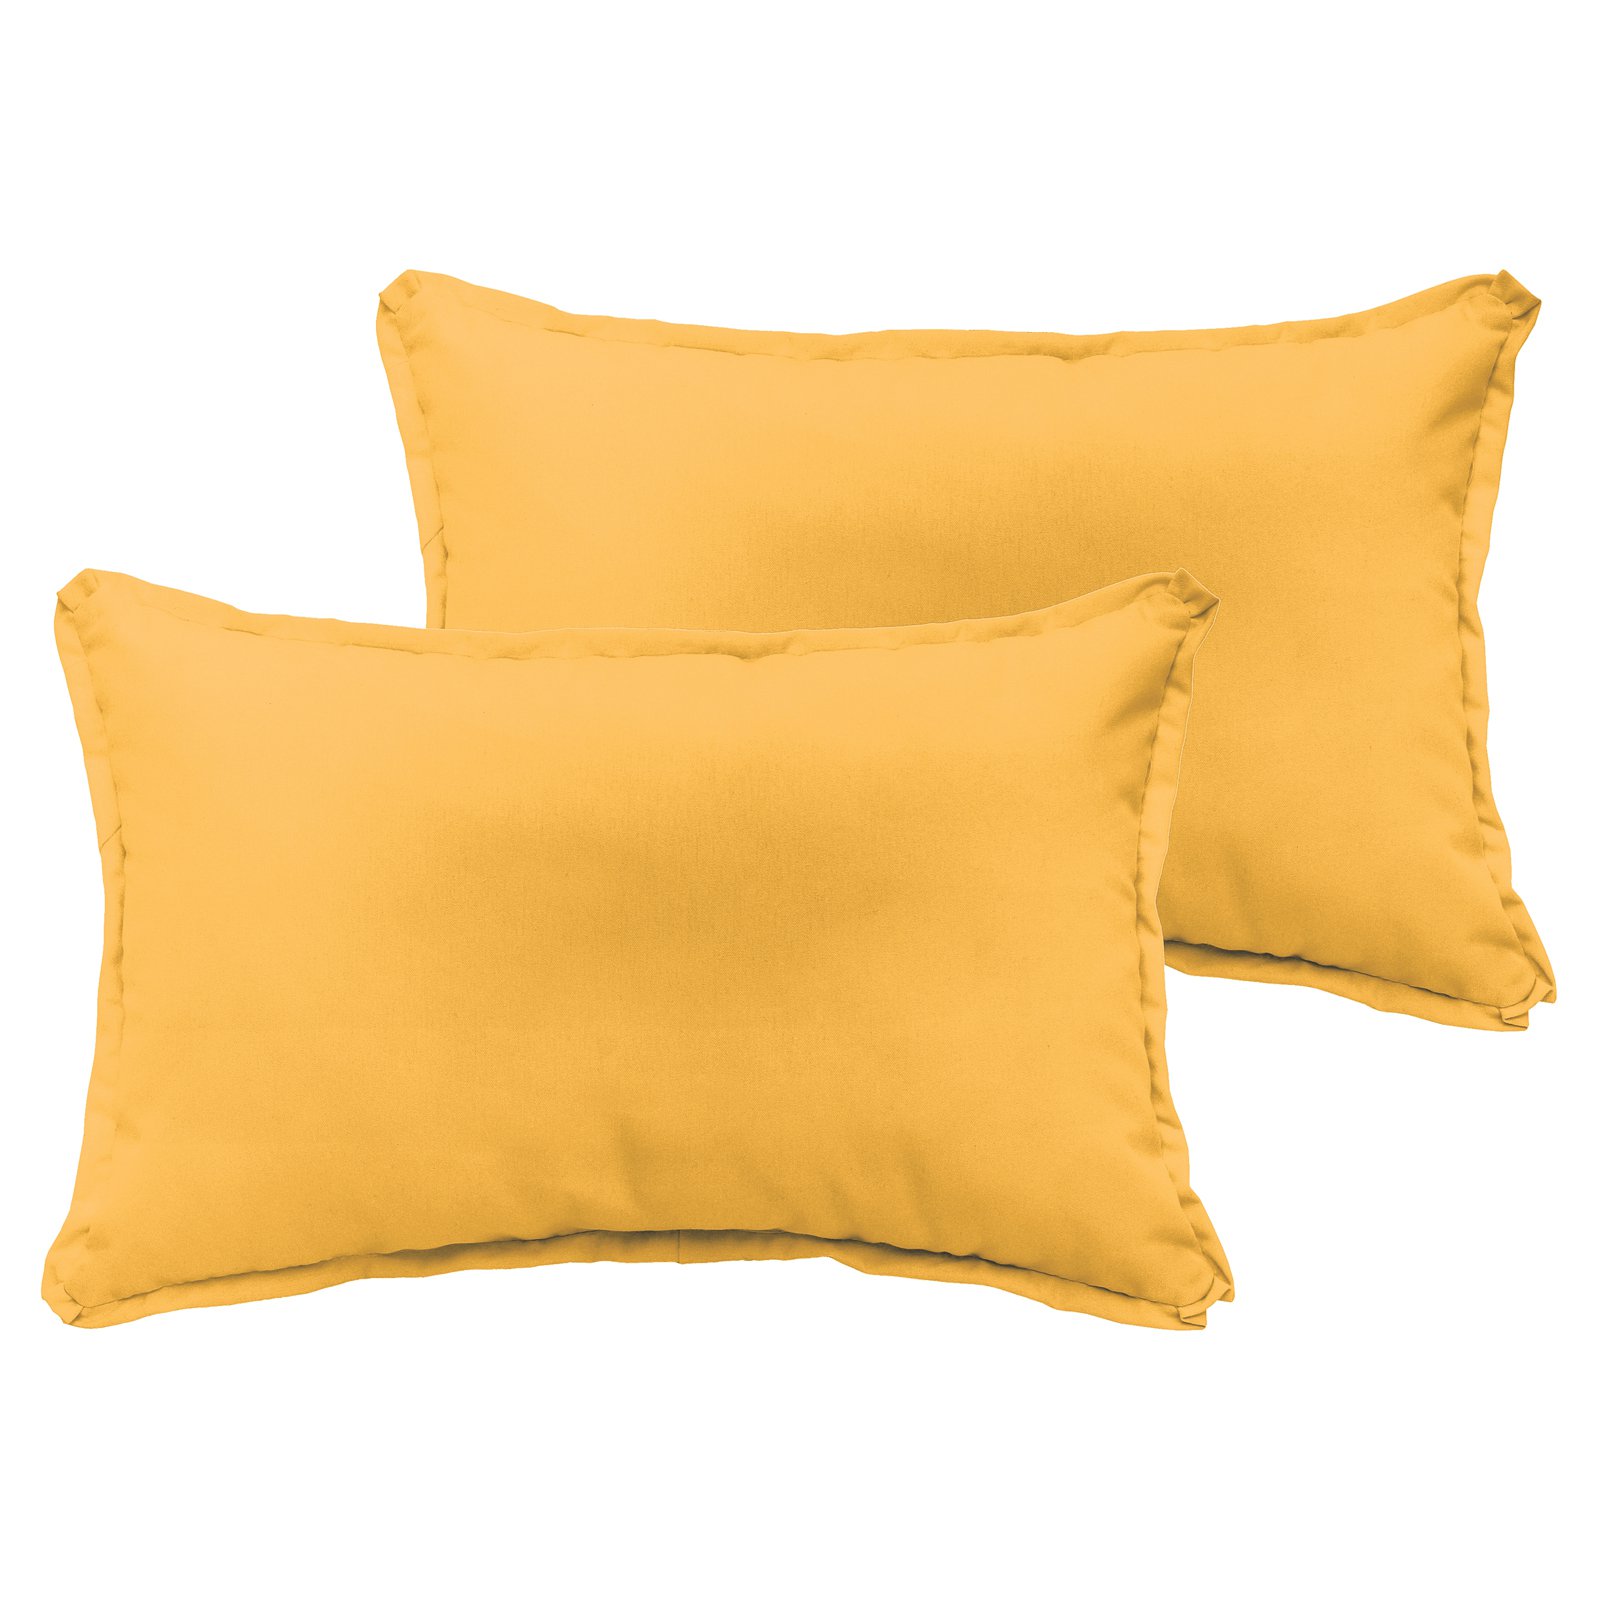 Mozaic Company 24 in. Outdoor Lumbar Pillow - Set of 2 - image 1 of 2